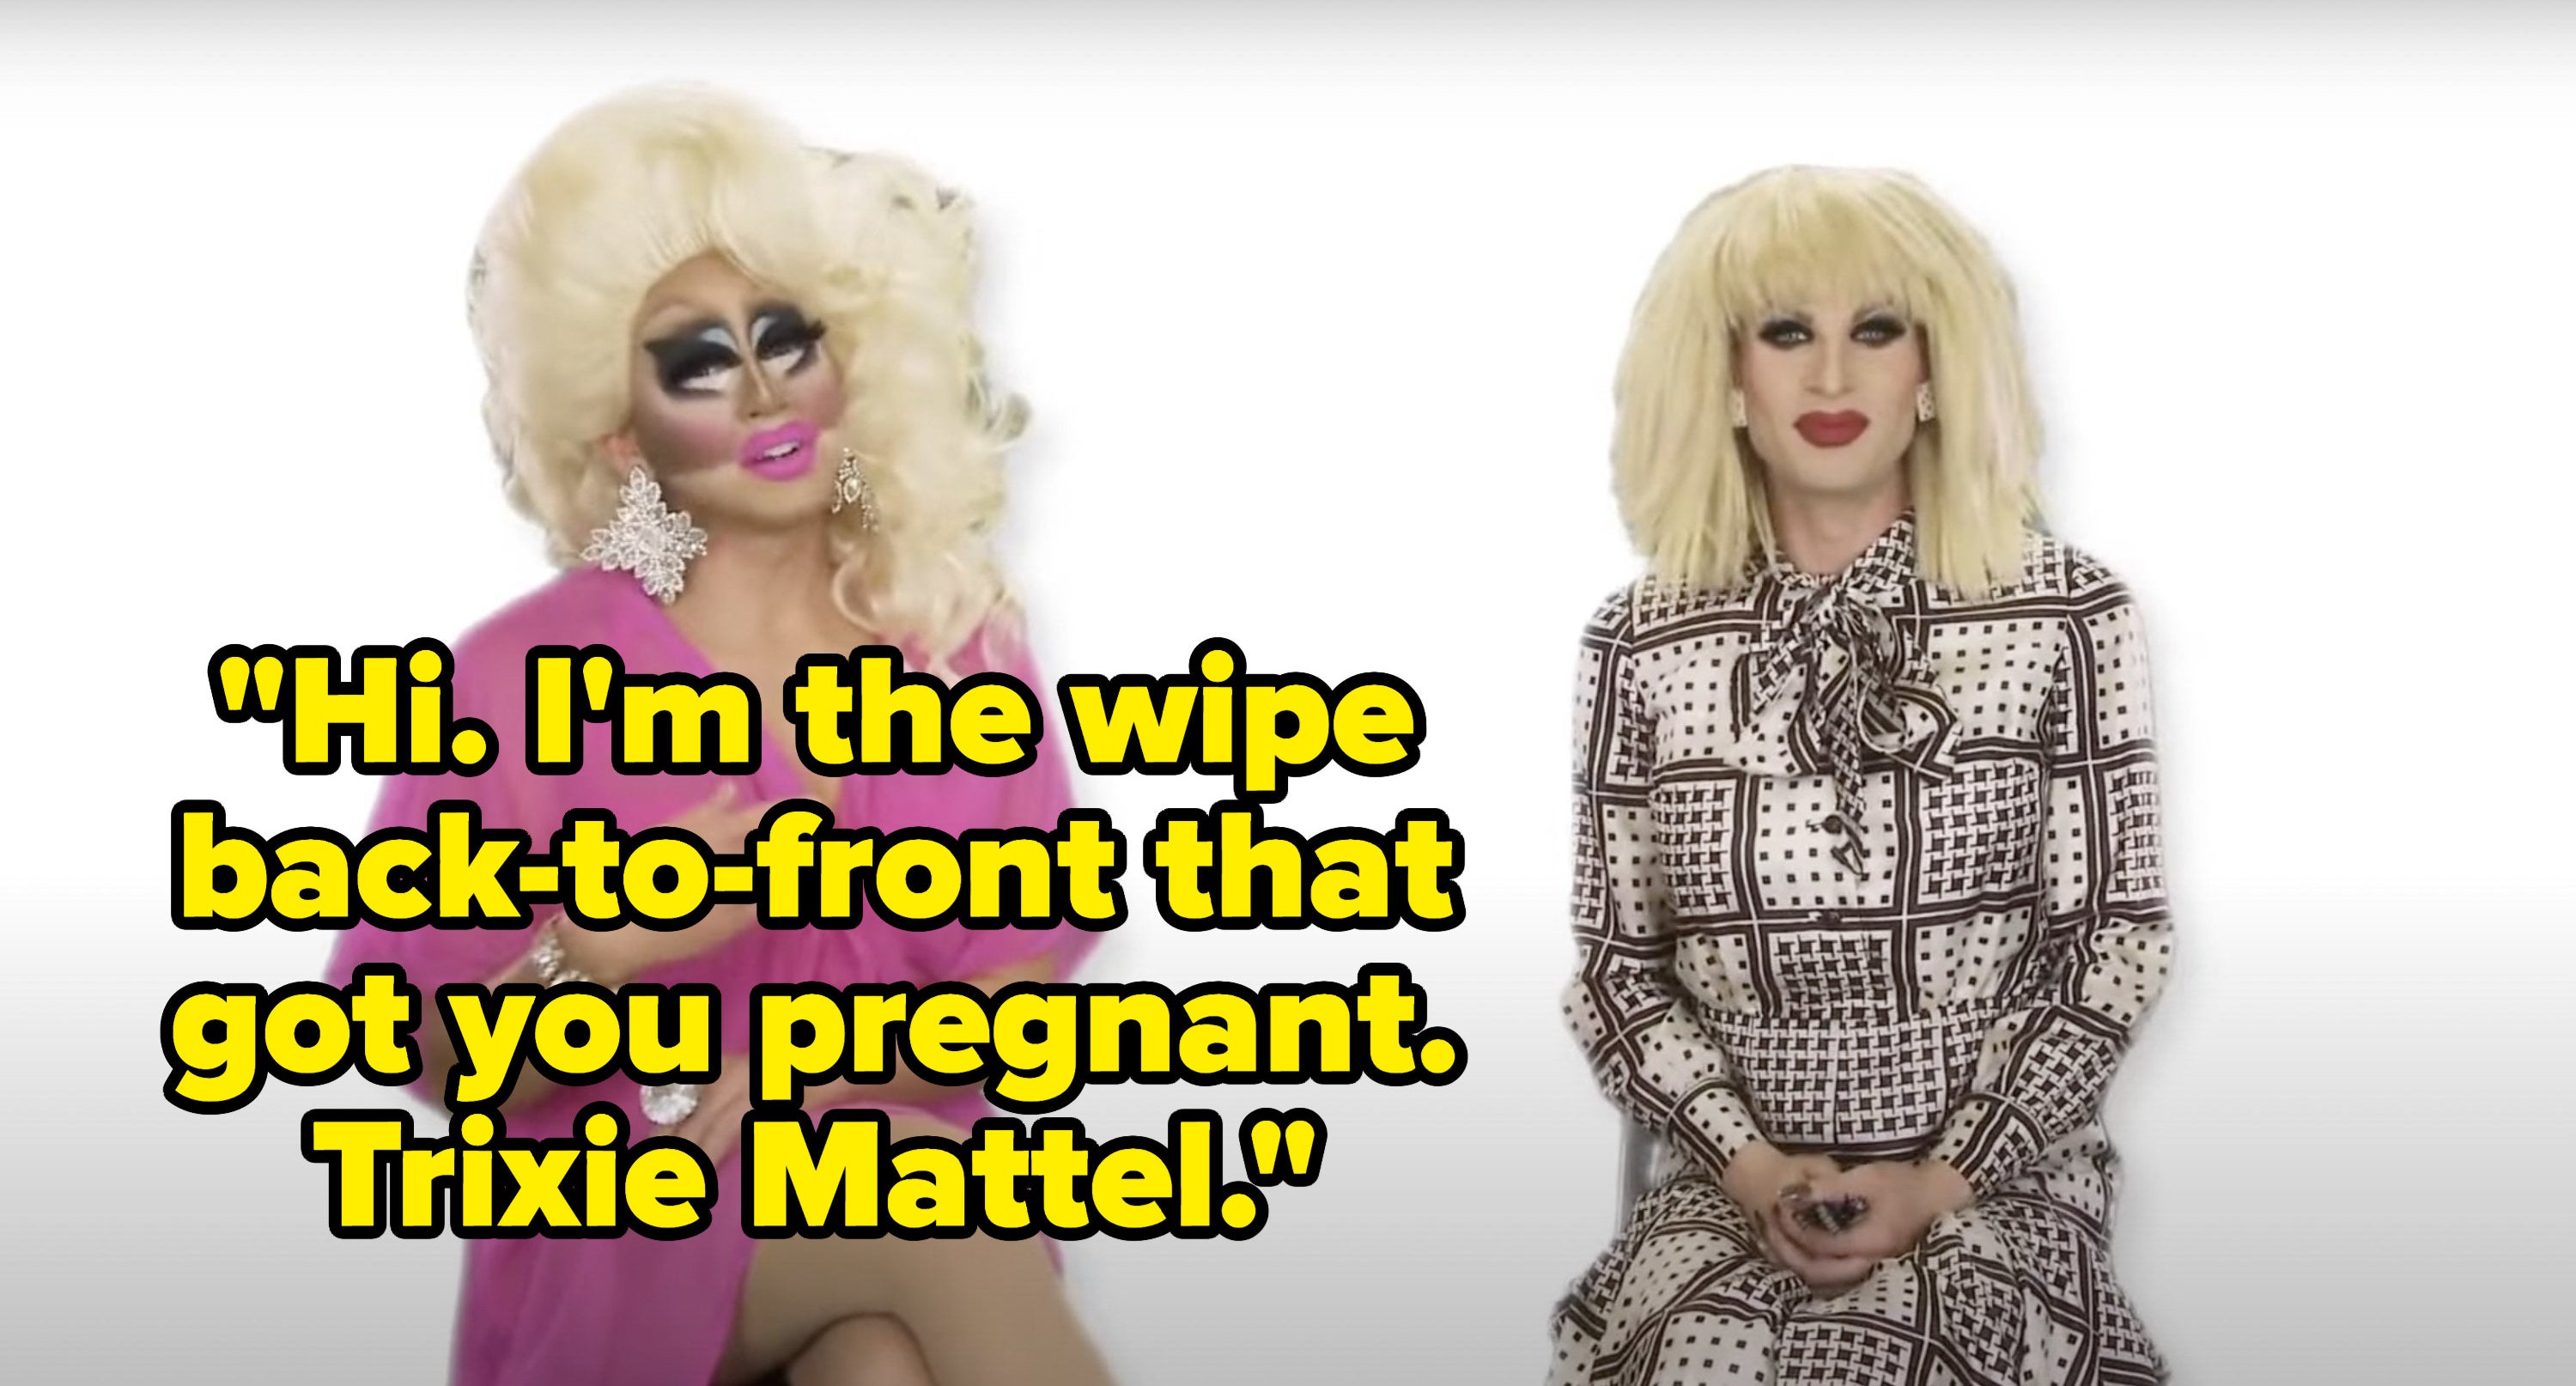 Trixie says, Hi, Im the wipe back to front that got you pregnant, Trixie Mattel